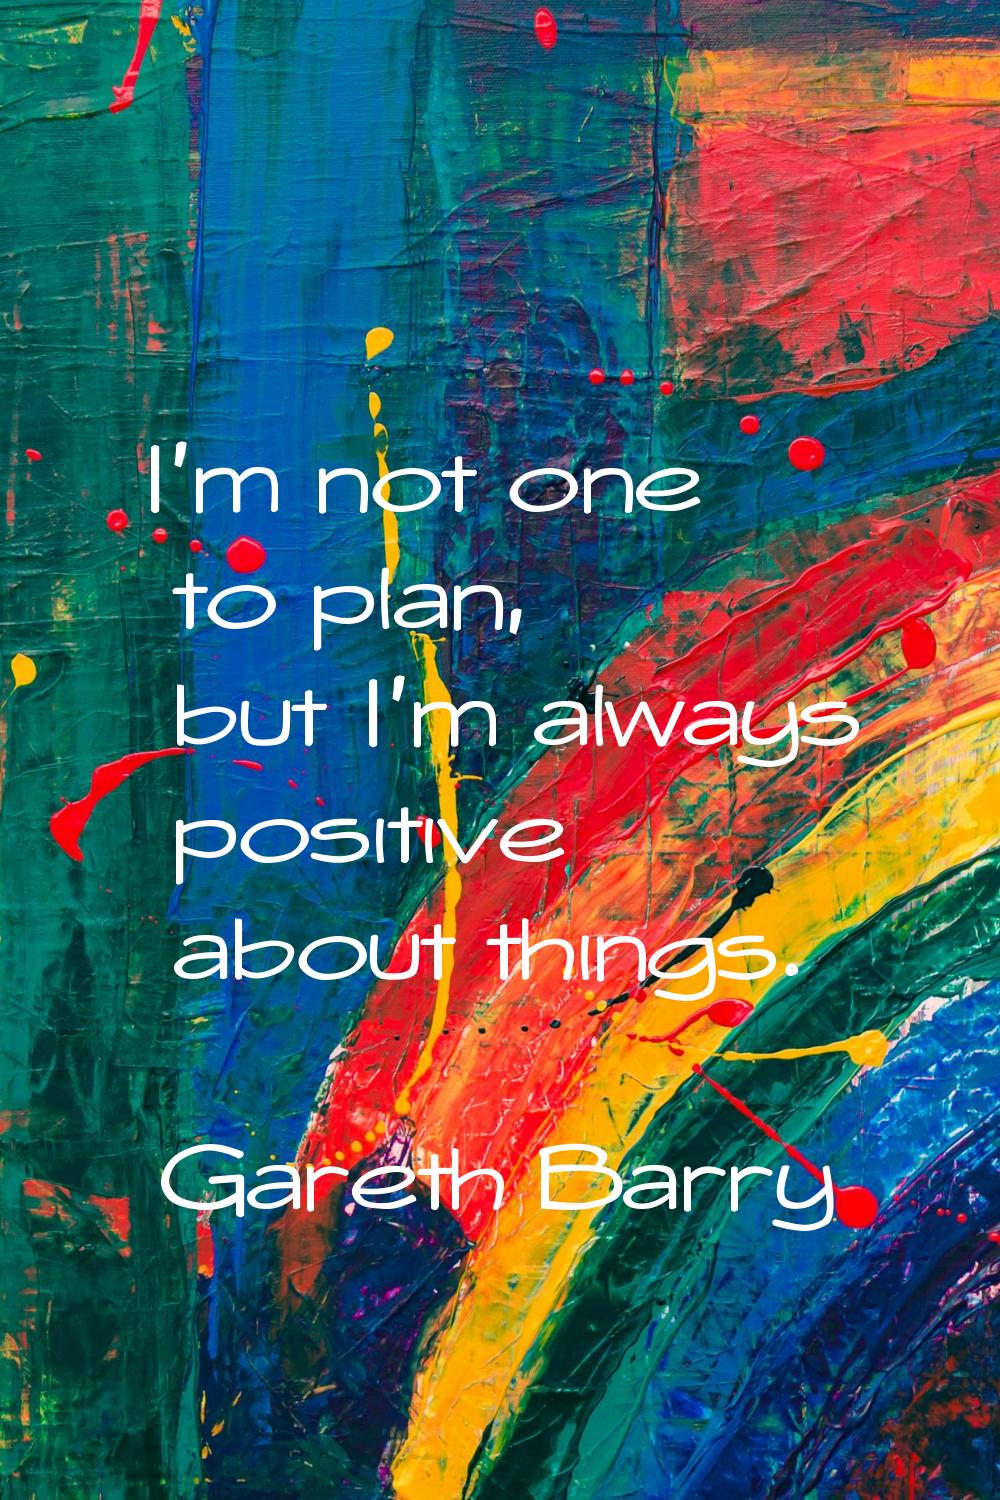 I'm not one to plan, but I'm always positive about things.